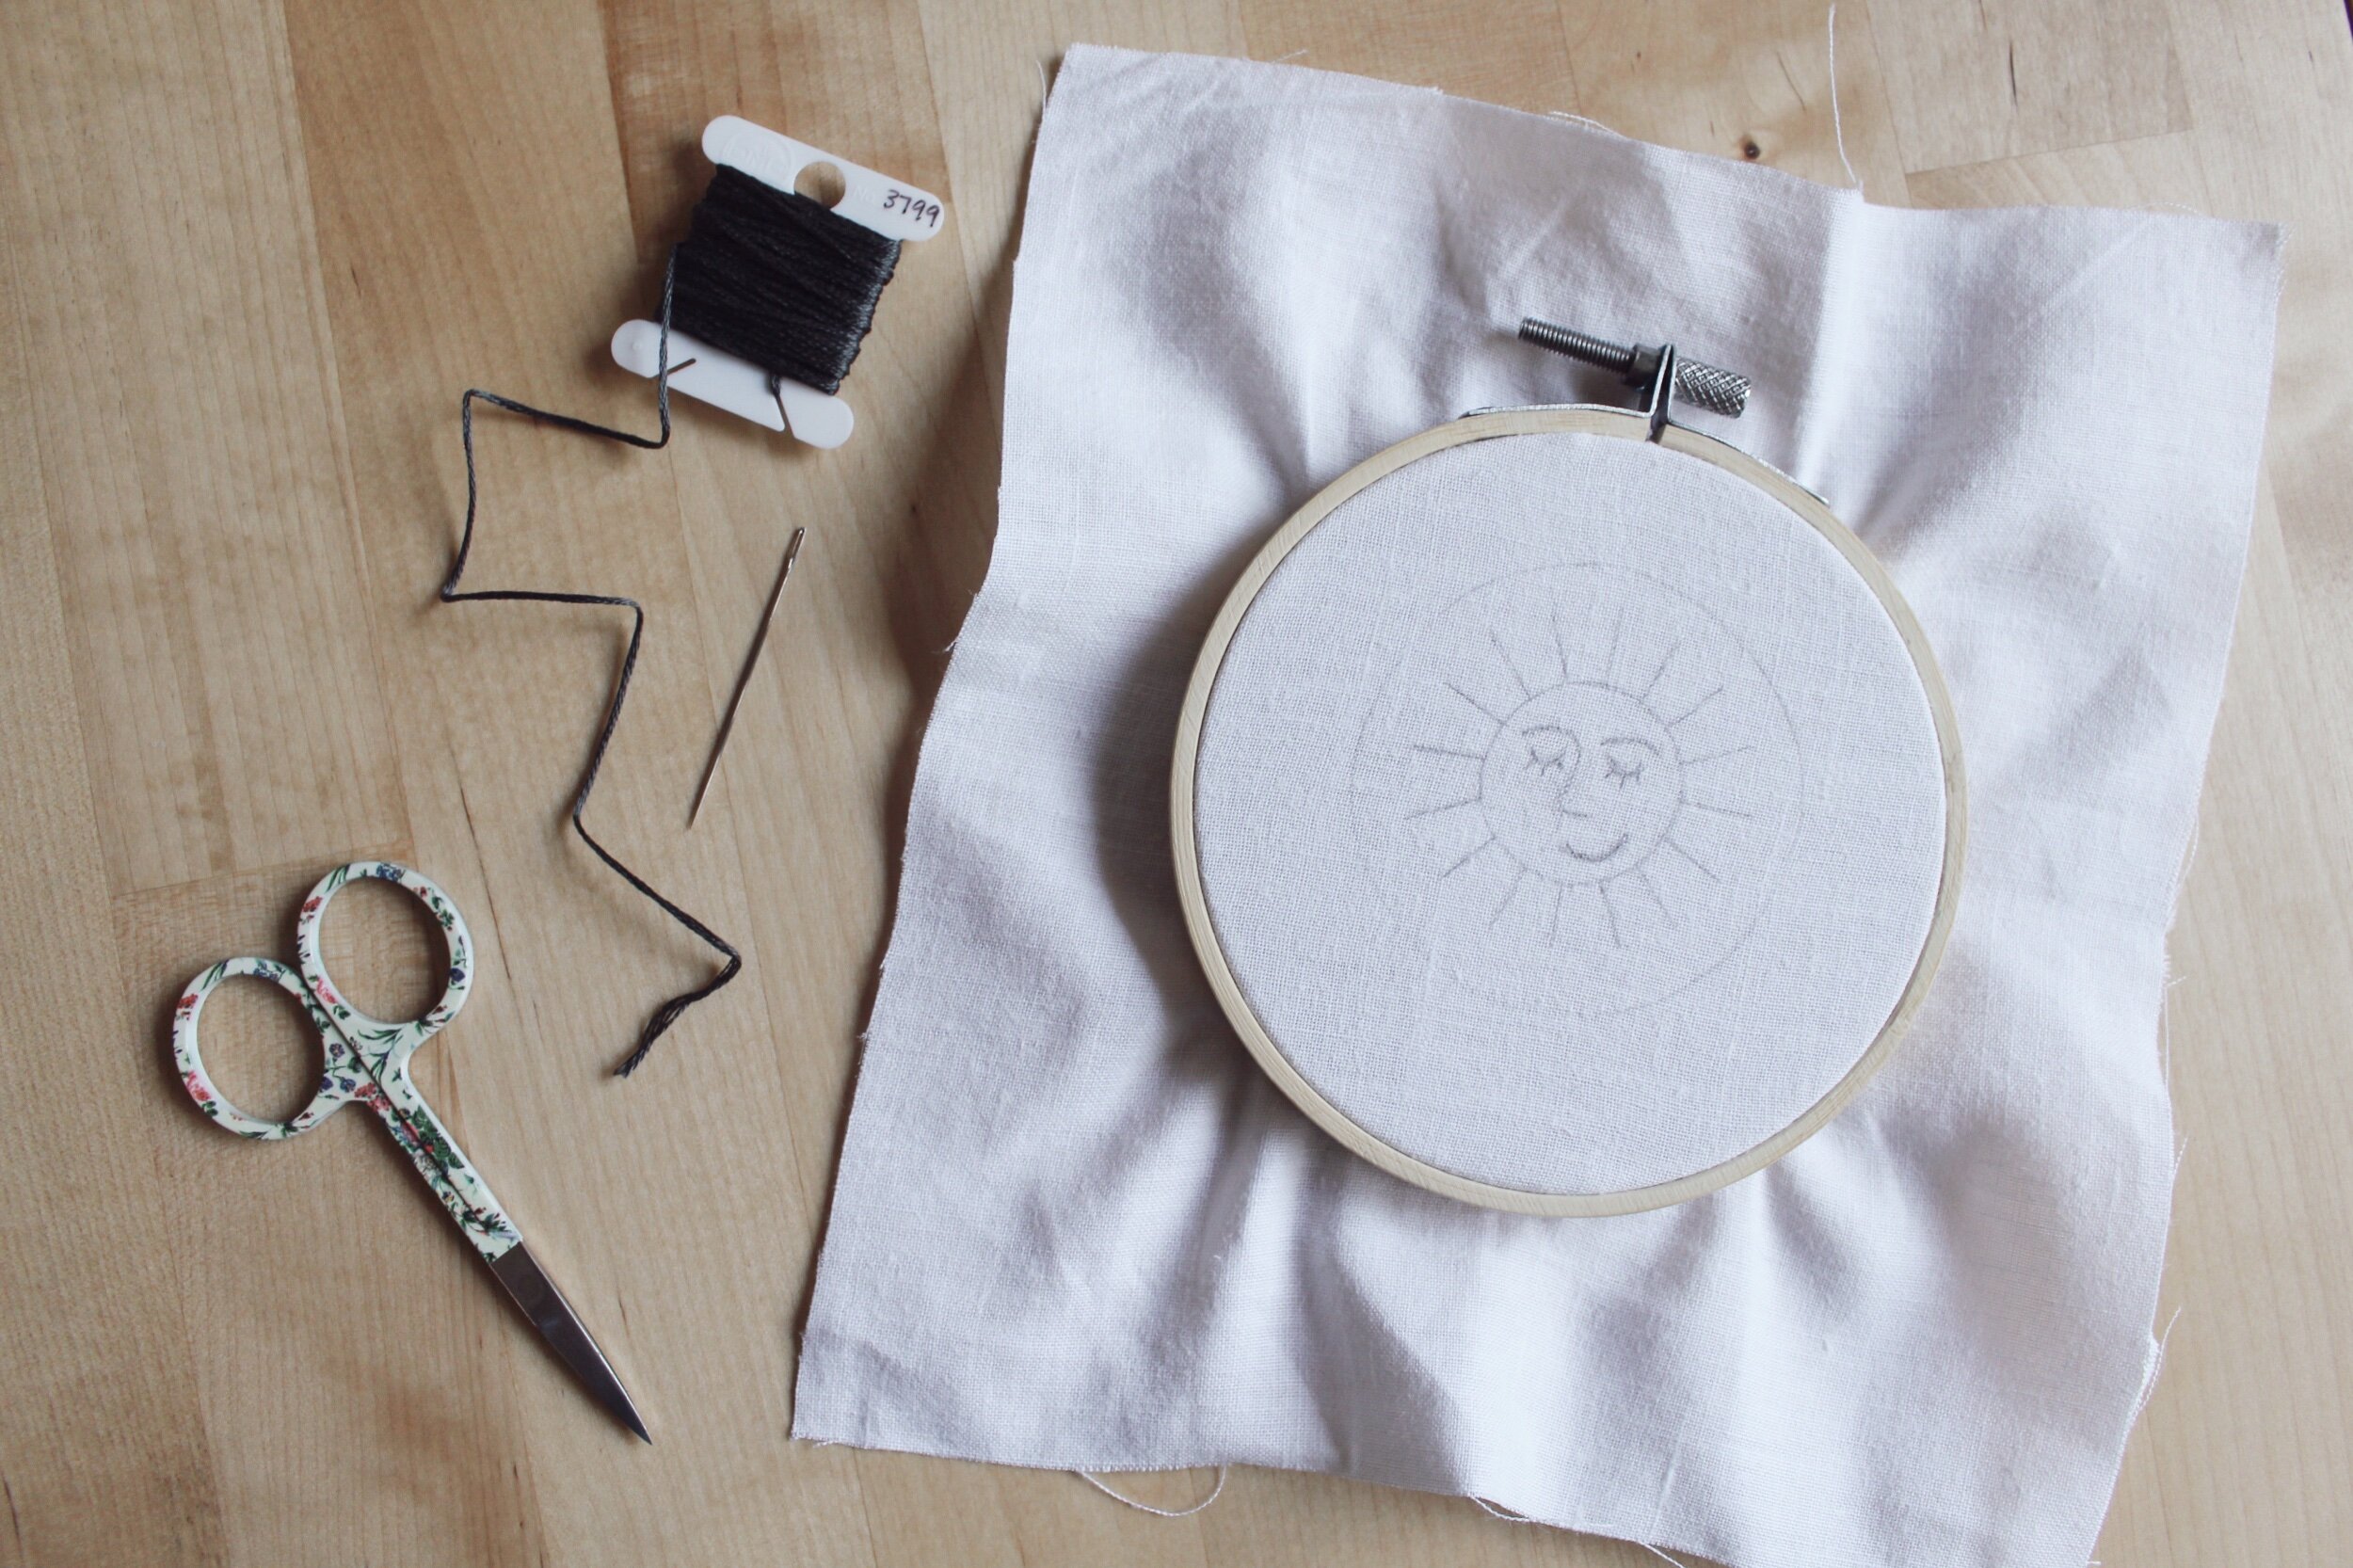 Step 4 - Apply the Backing  Embroidery hoop wall, Embroidery hoop wall  art, Embroidery hoop